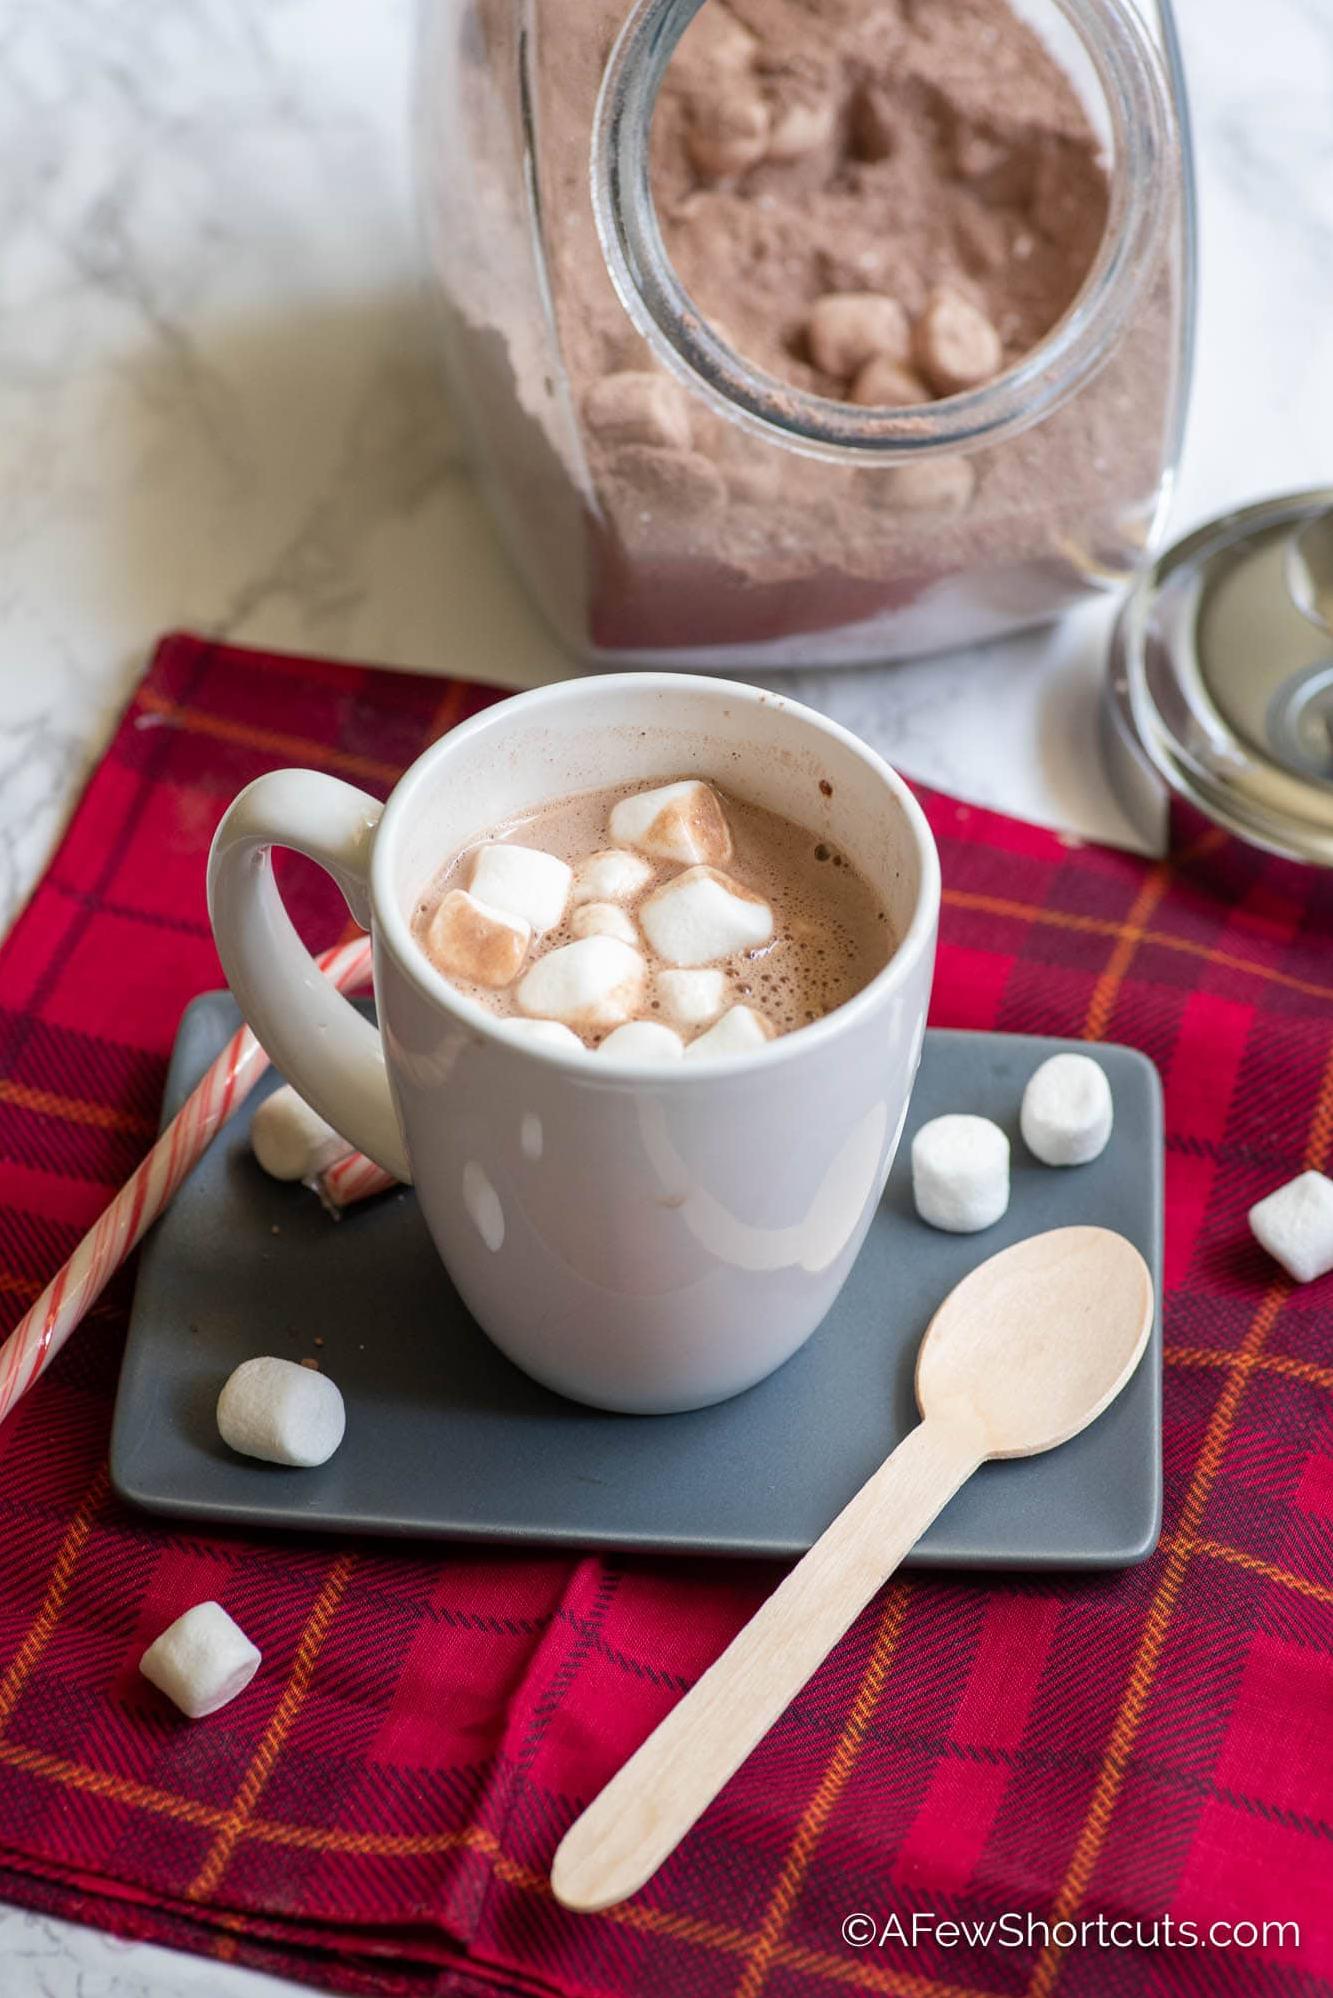  Indulge in a mug of decadent hot chocolate with this simple vegan mix.